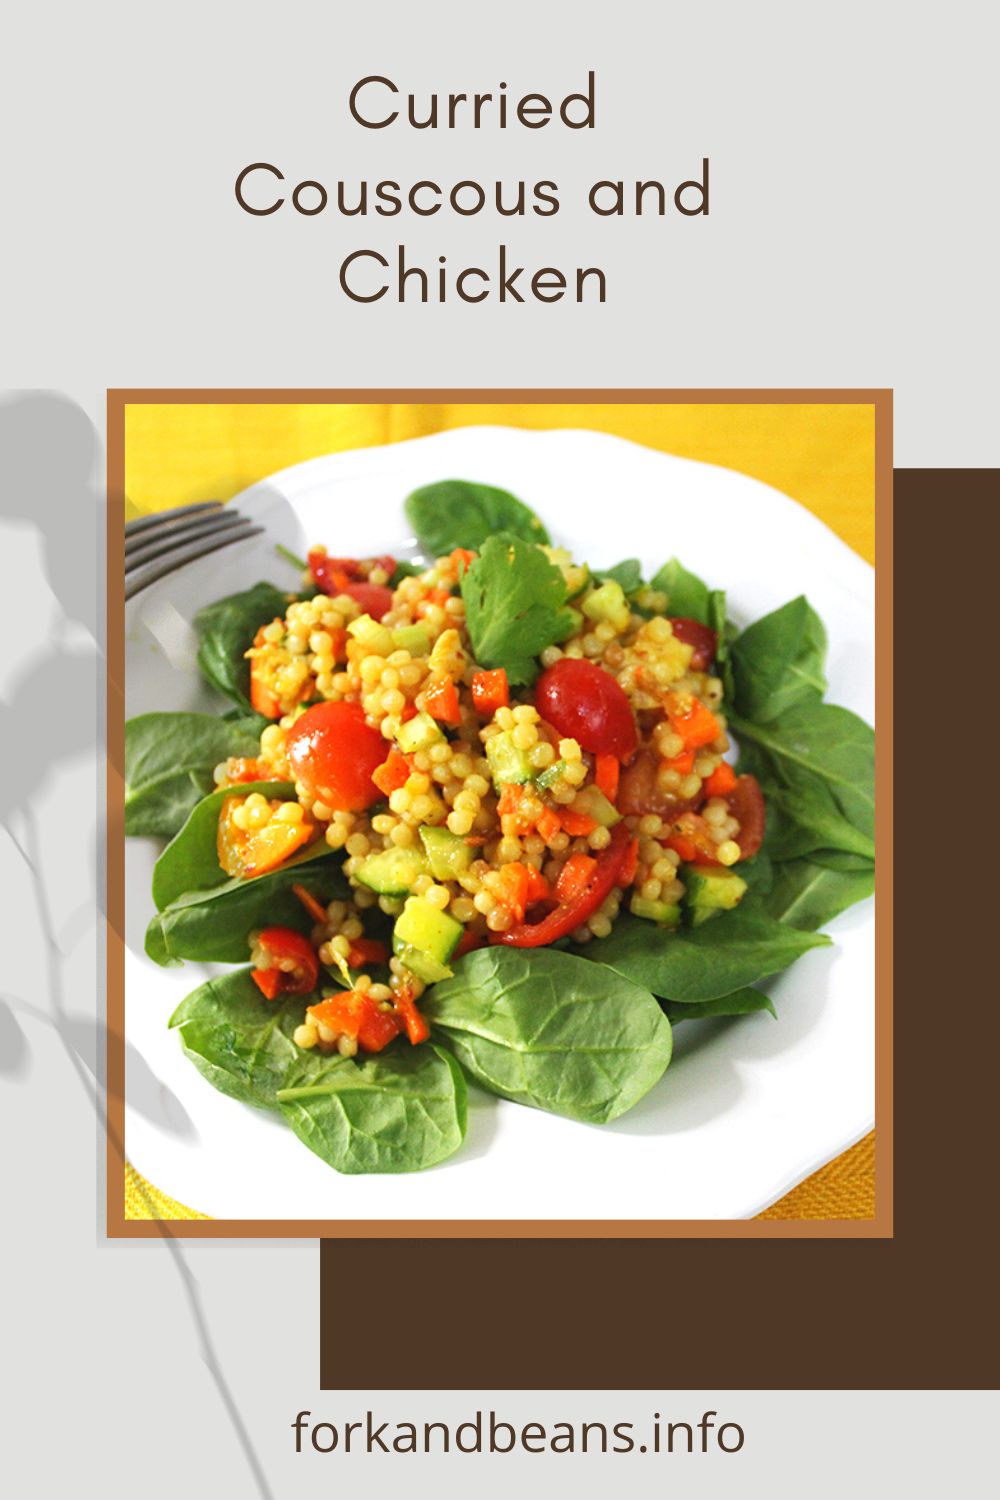 Salad with Curry Chicken and Couscous